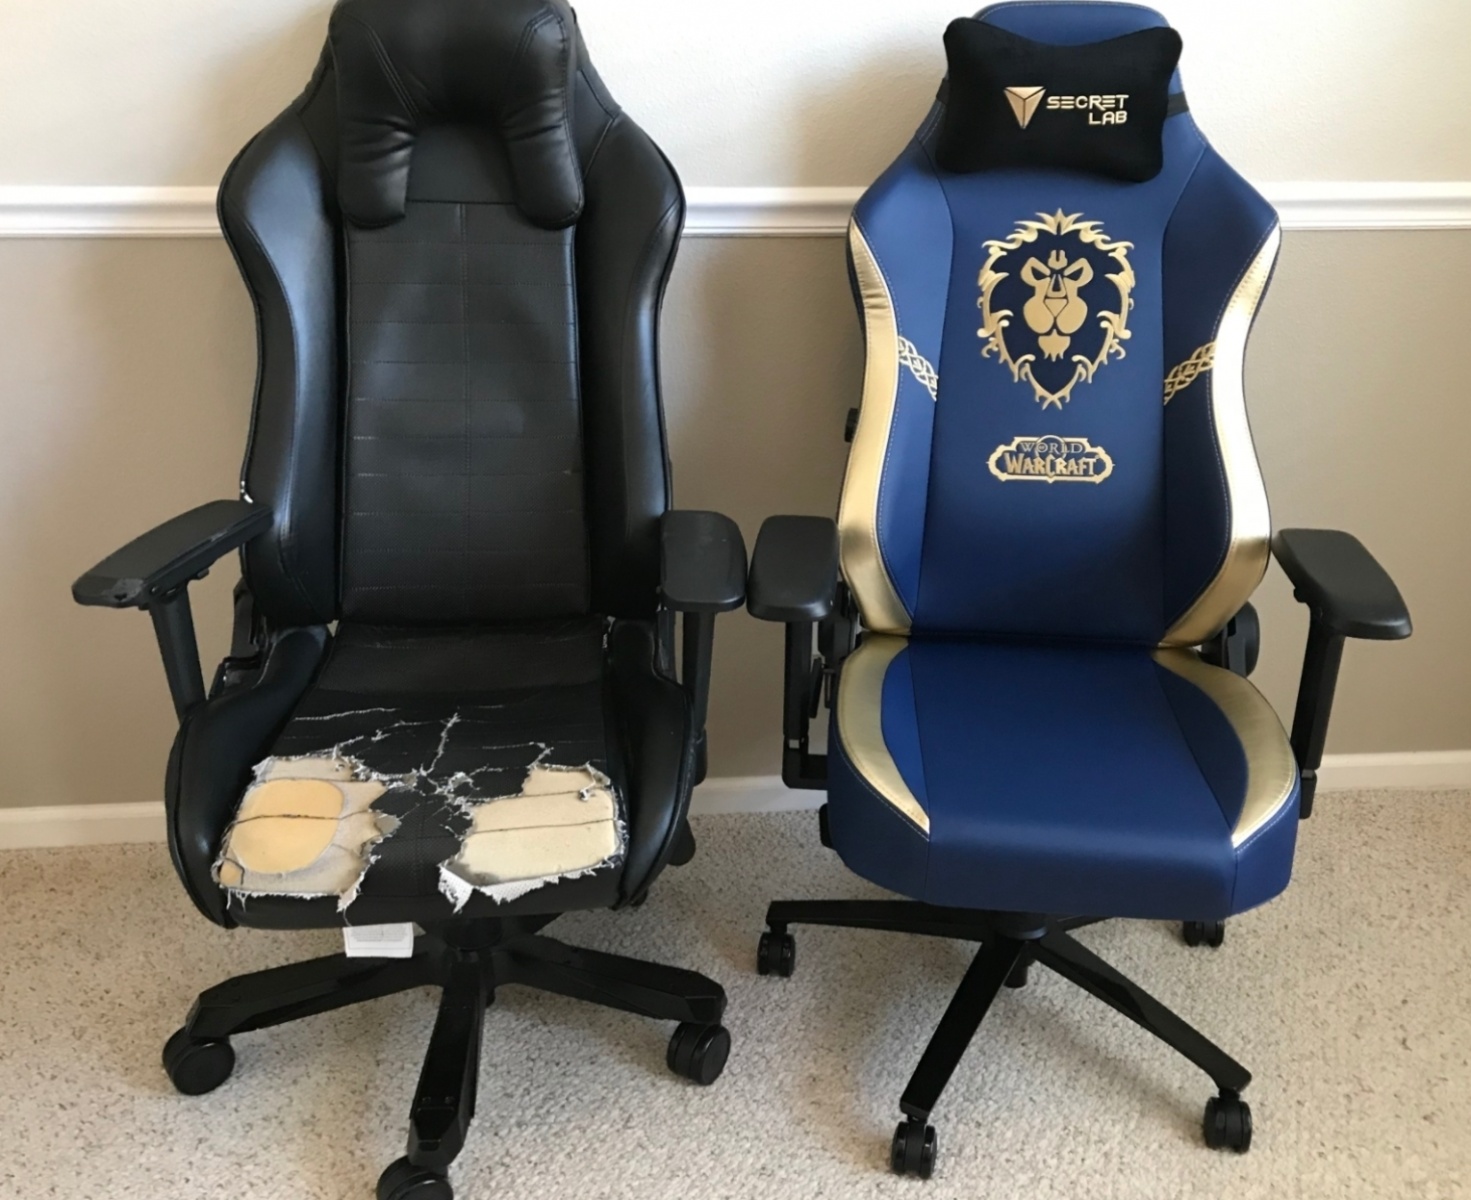 Hands On Build And Review With The Alliance Edition Secretlab Titan 2020 Gaming Chair Wowhead News